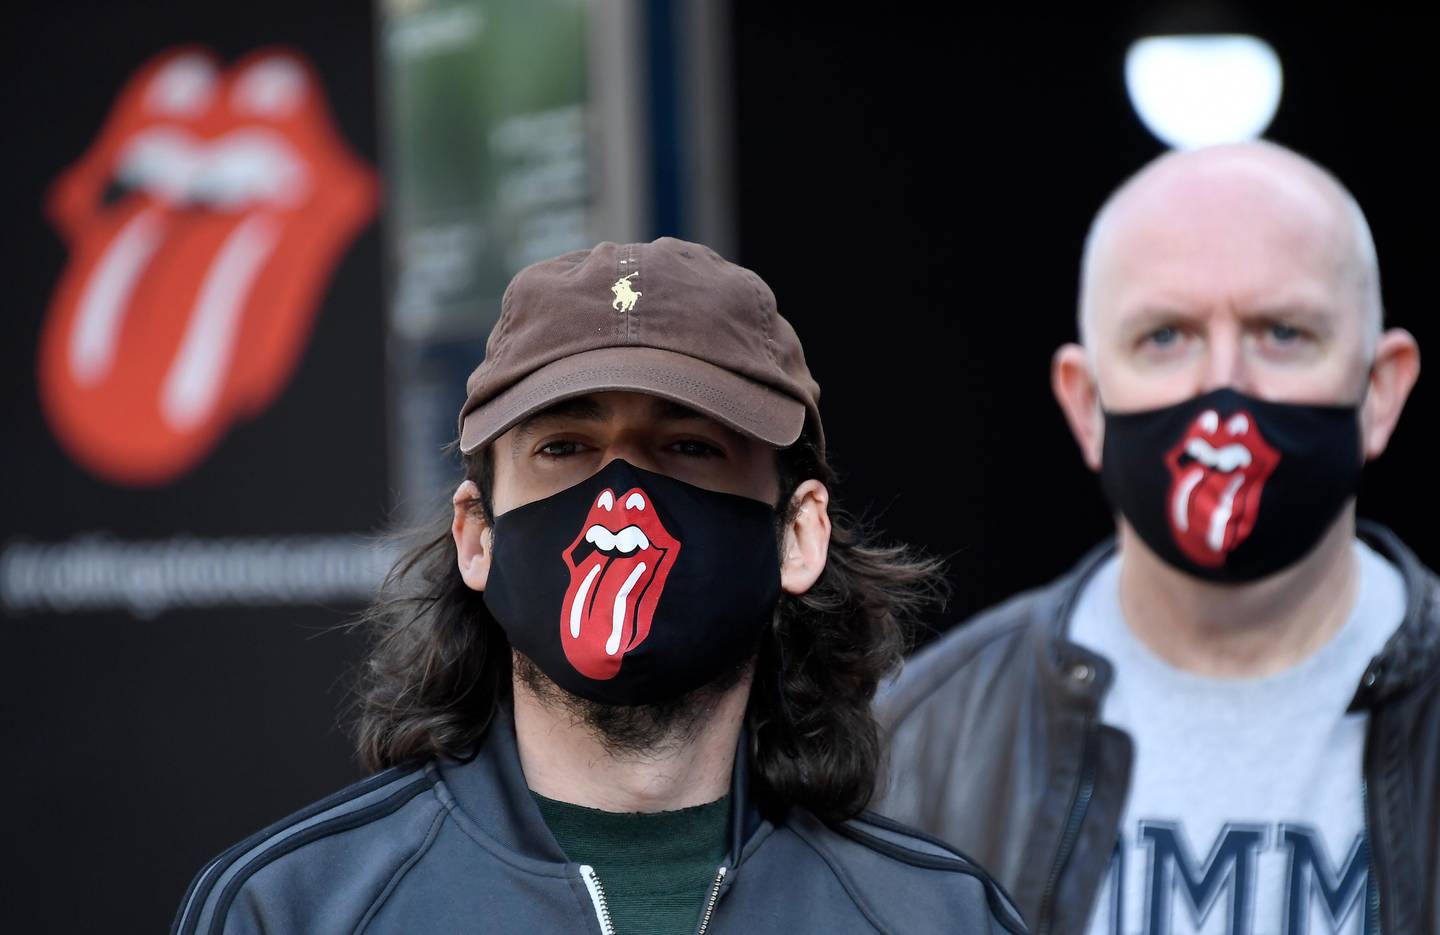 Rolling Stones fans wear face masks as they queue during the opening of Rolling Stones flagship store in London, Wednesday, Sept. 9, 2020. The shop will sell fashion and merchandise, as well as music, from the famous rock band. (AP Photo/Alberto Pezzali)